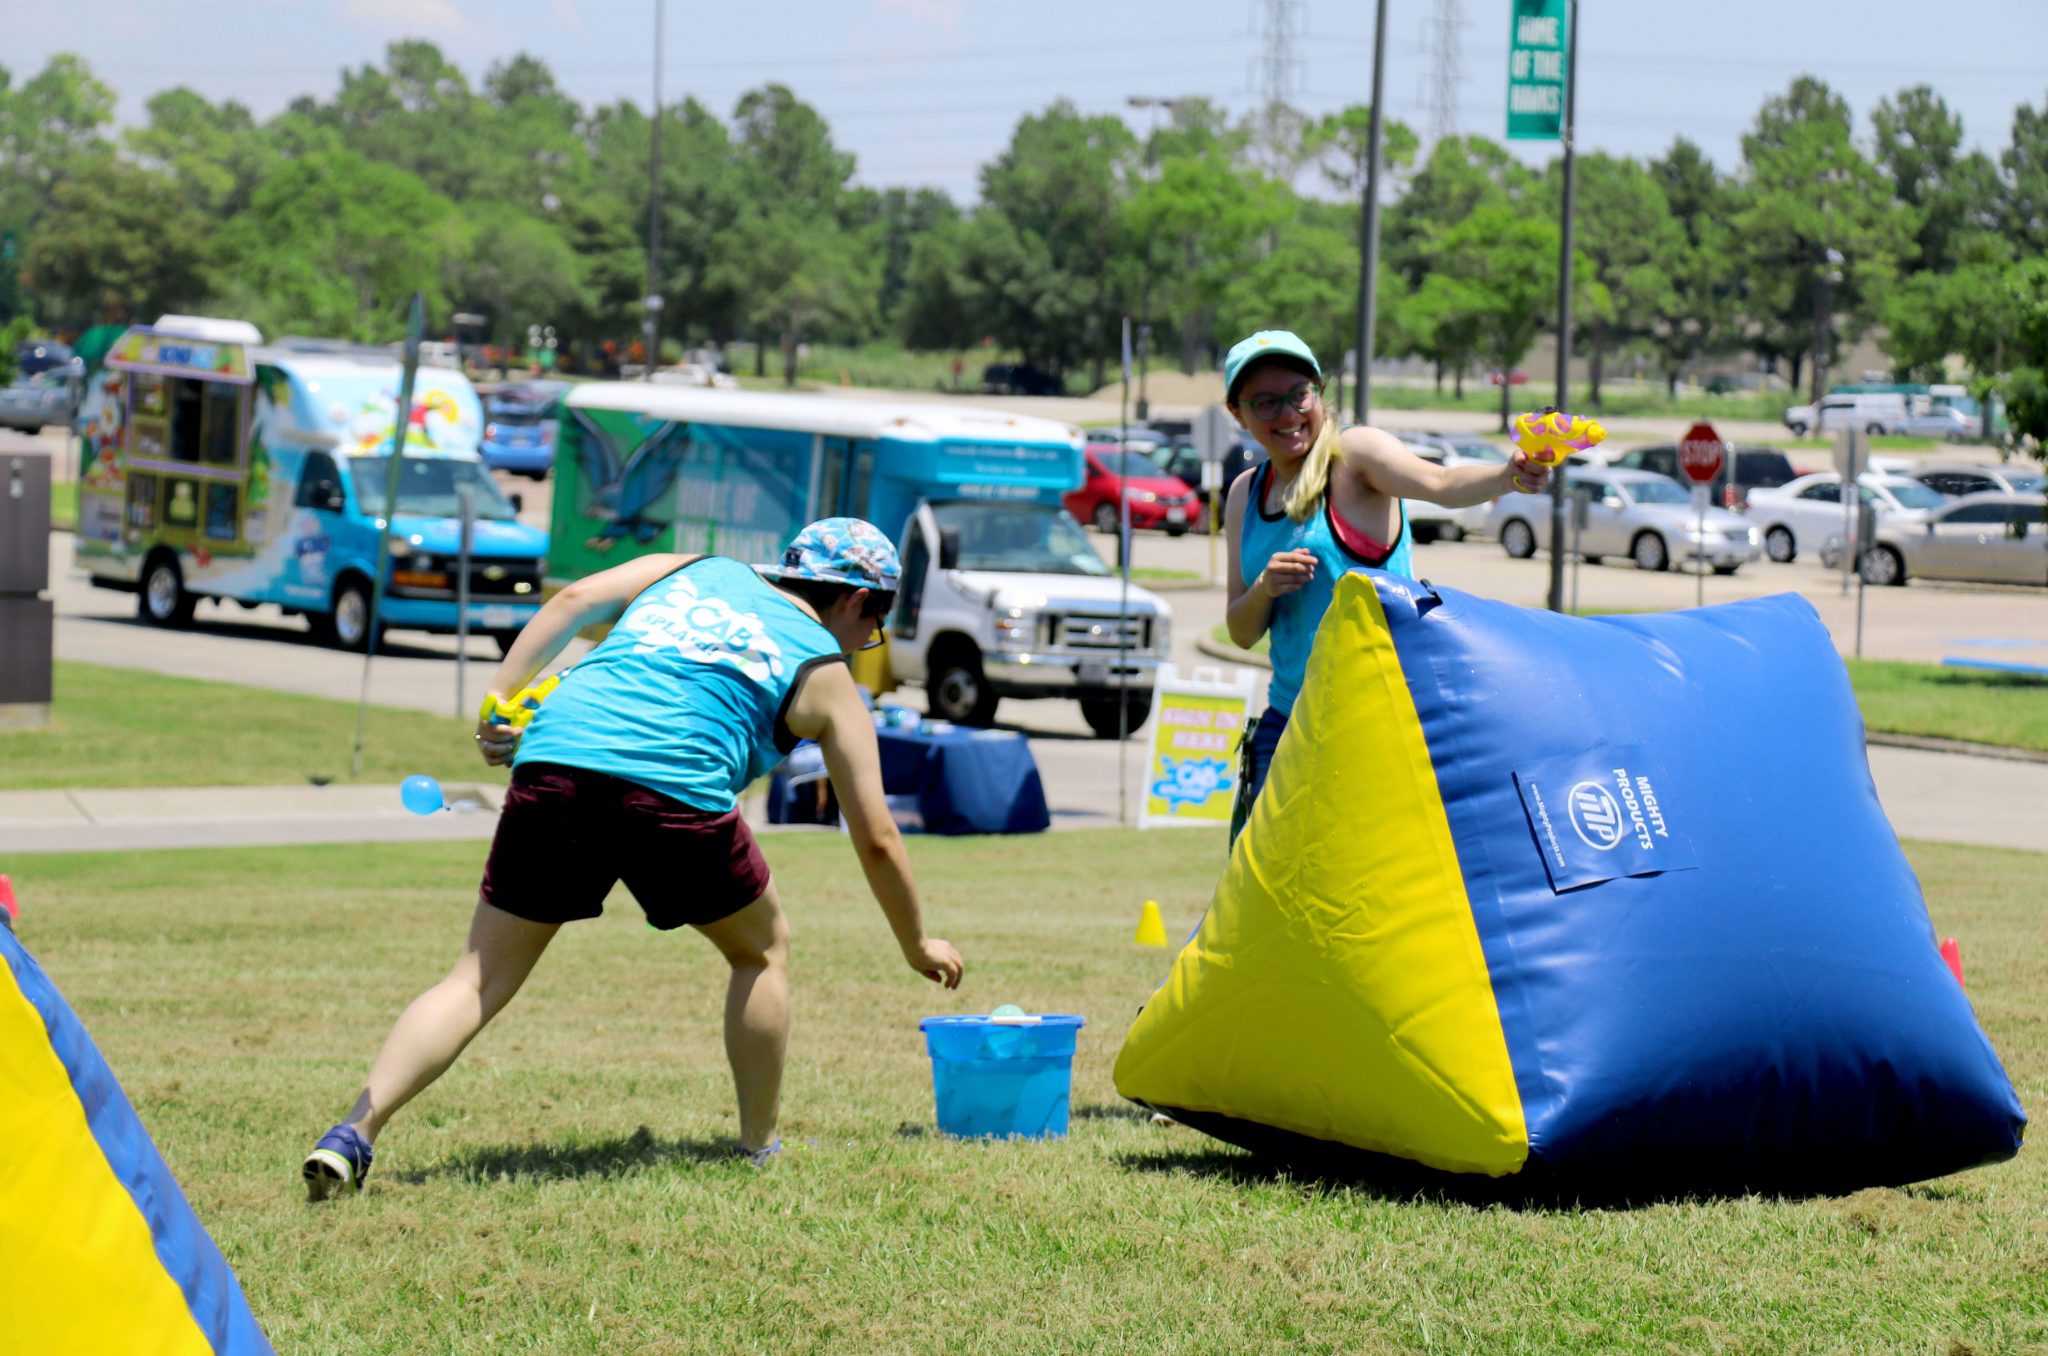 PHOTO: CAB hosted an outdoors summer event called CAB Splash! which featured water games, a duck race and prizes. Photo courtesy of The Signal reporter Izuh Ikpeama.